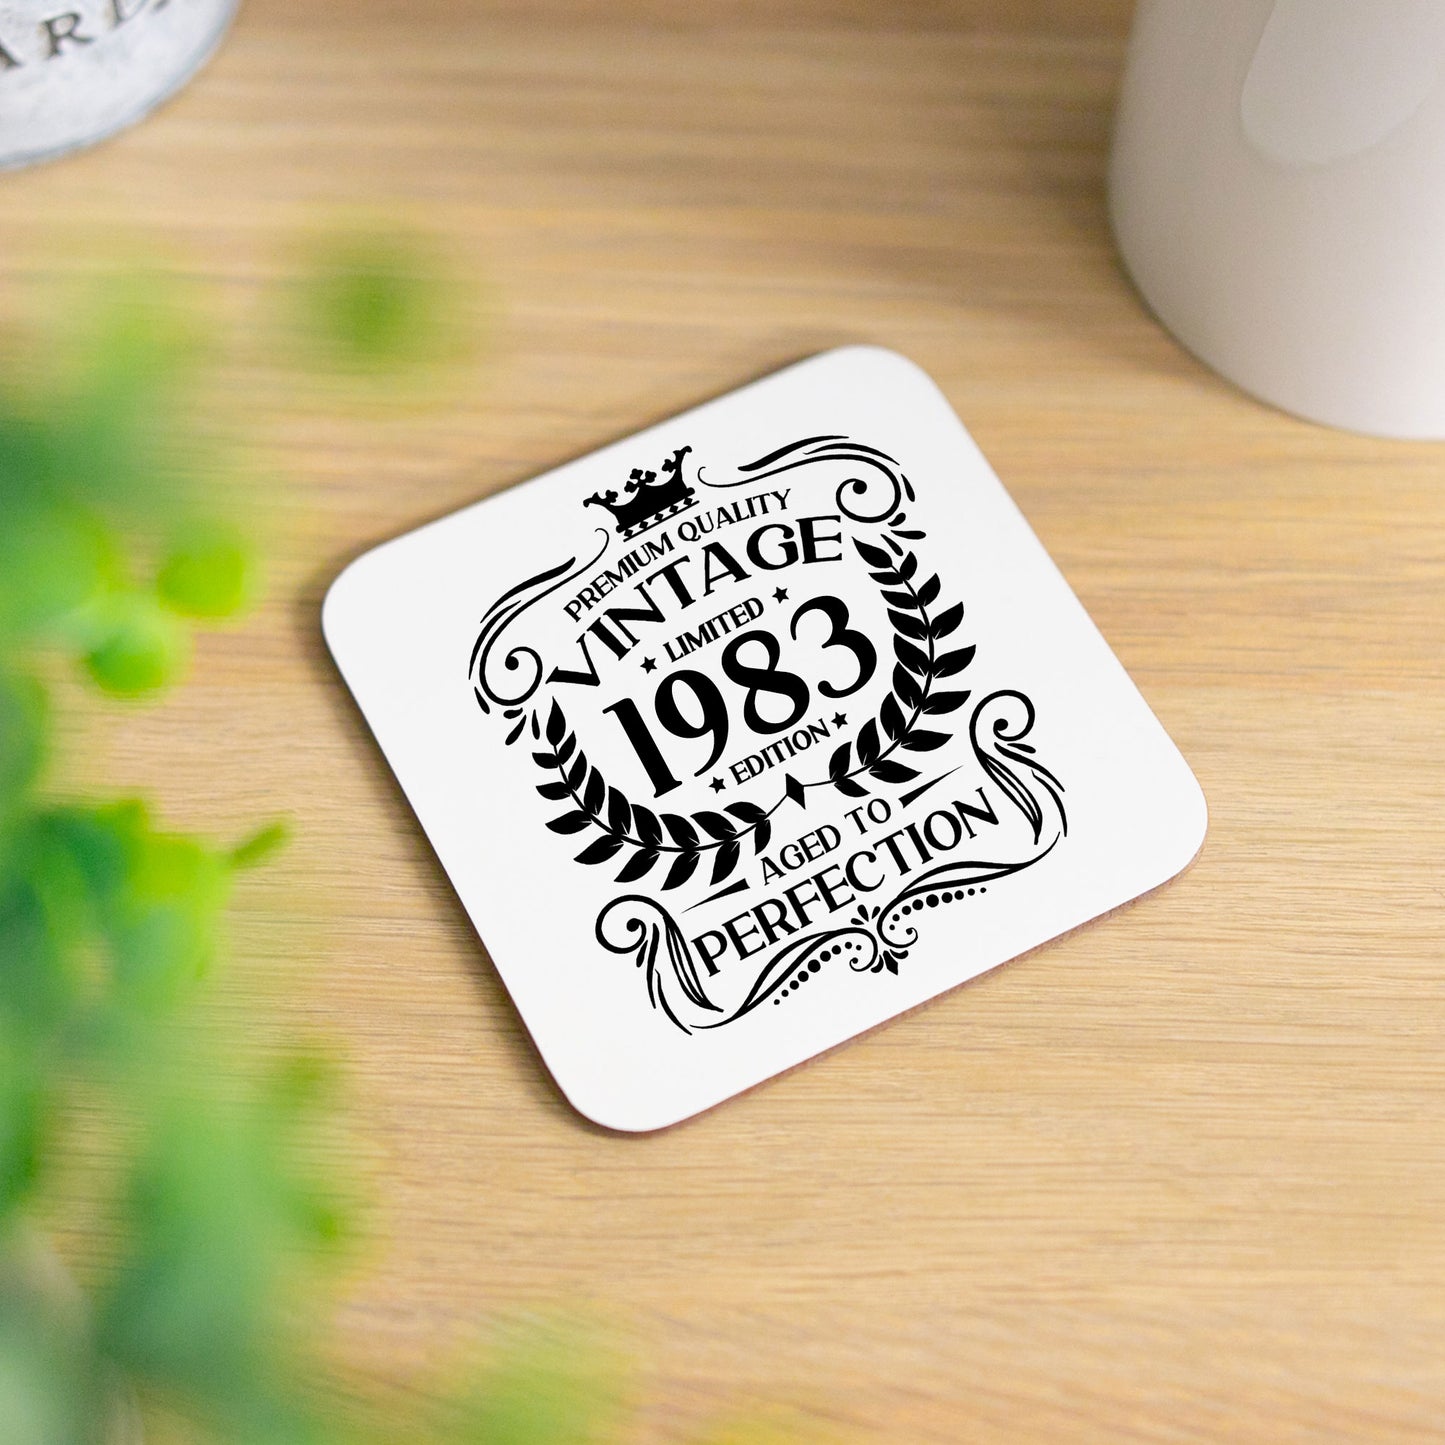 Vintage 1983 40th Birthday Engraved Wine Glass Gift  - Always Looking Good - Glass & Printed Coaster  